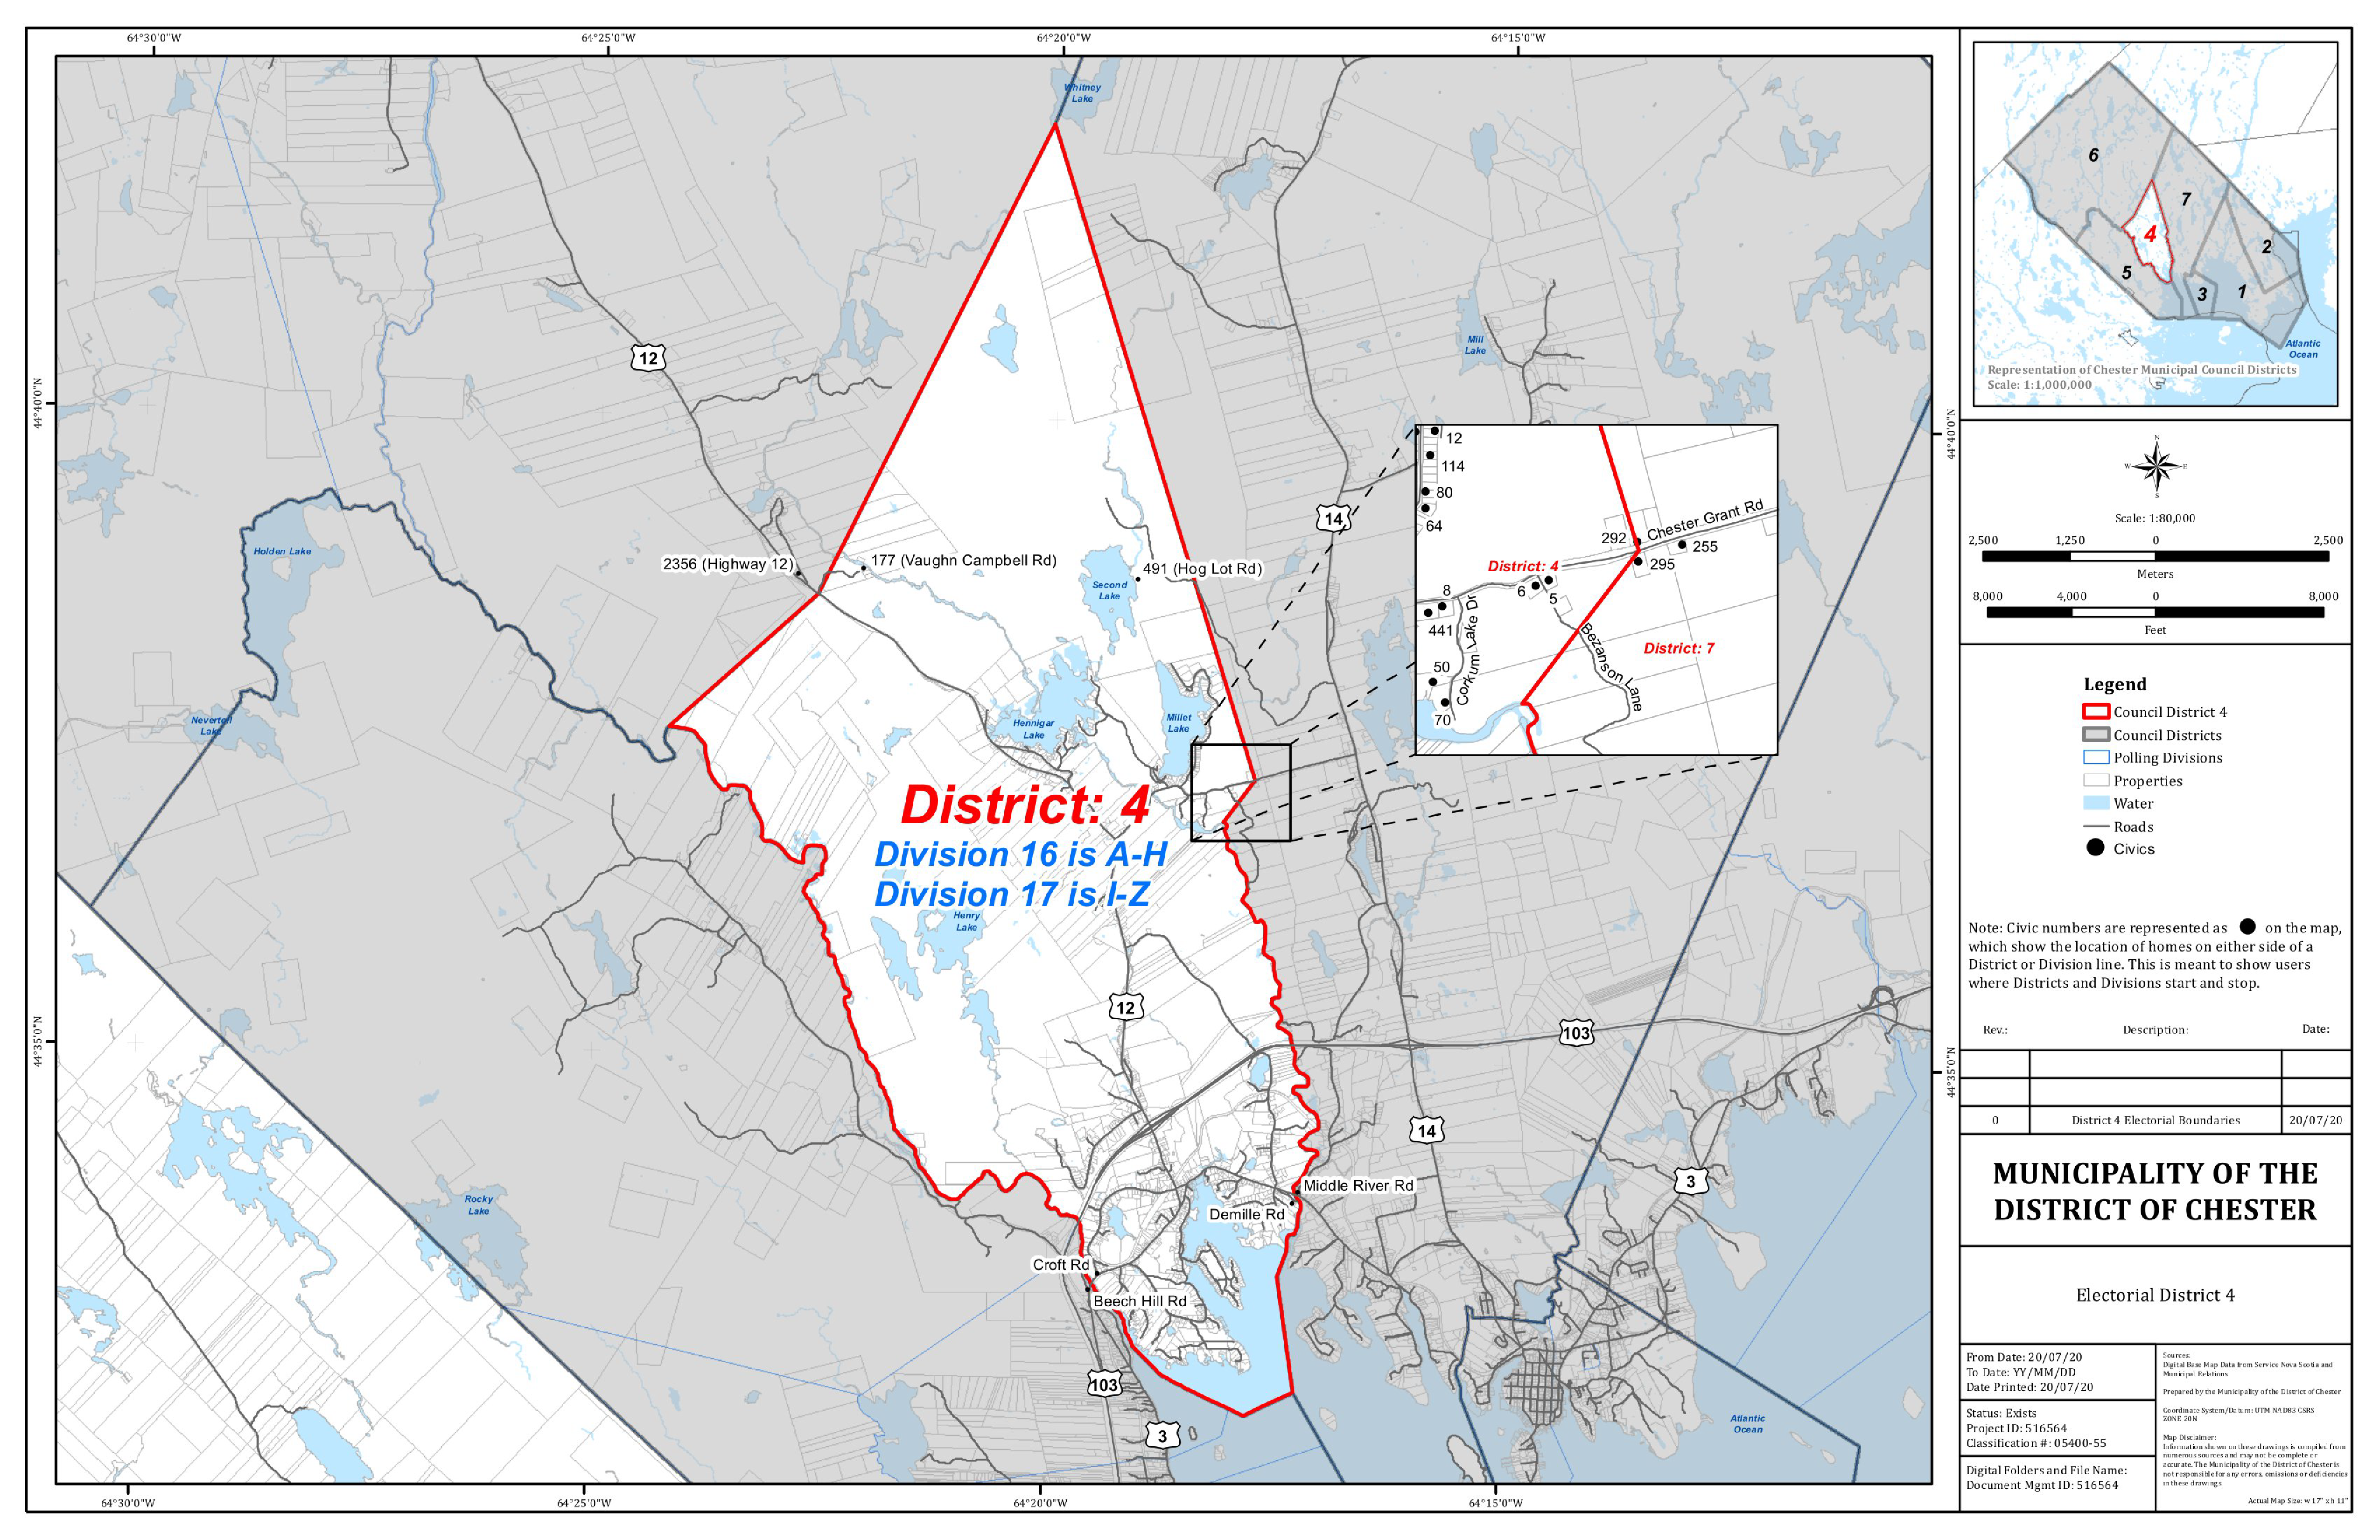 Graphic showing map of Electorial District 4 of the Municipality of the District of Chester